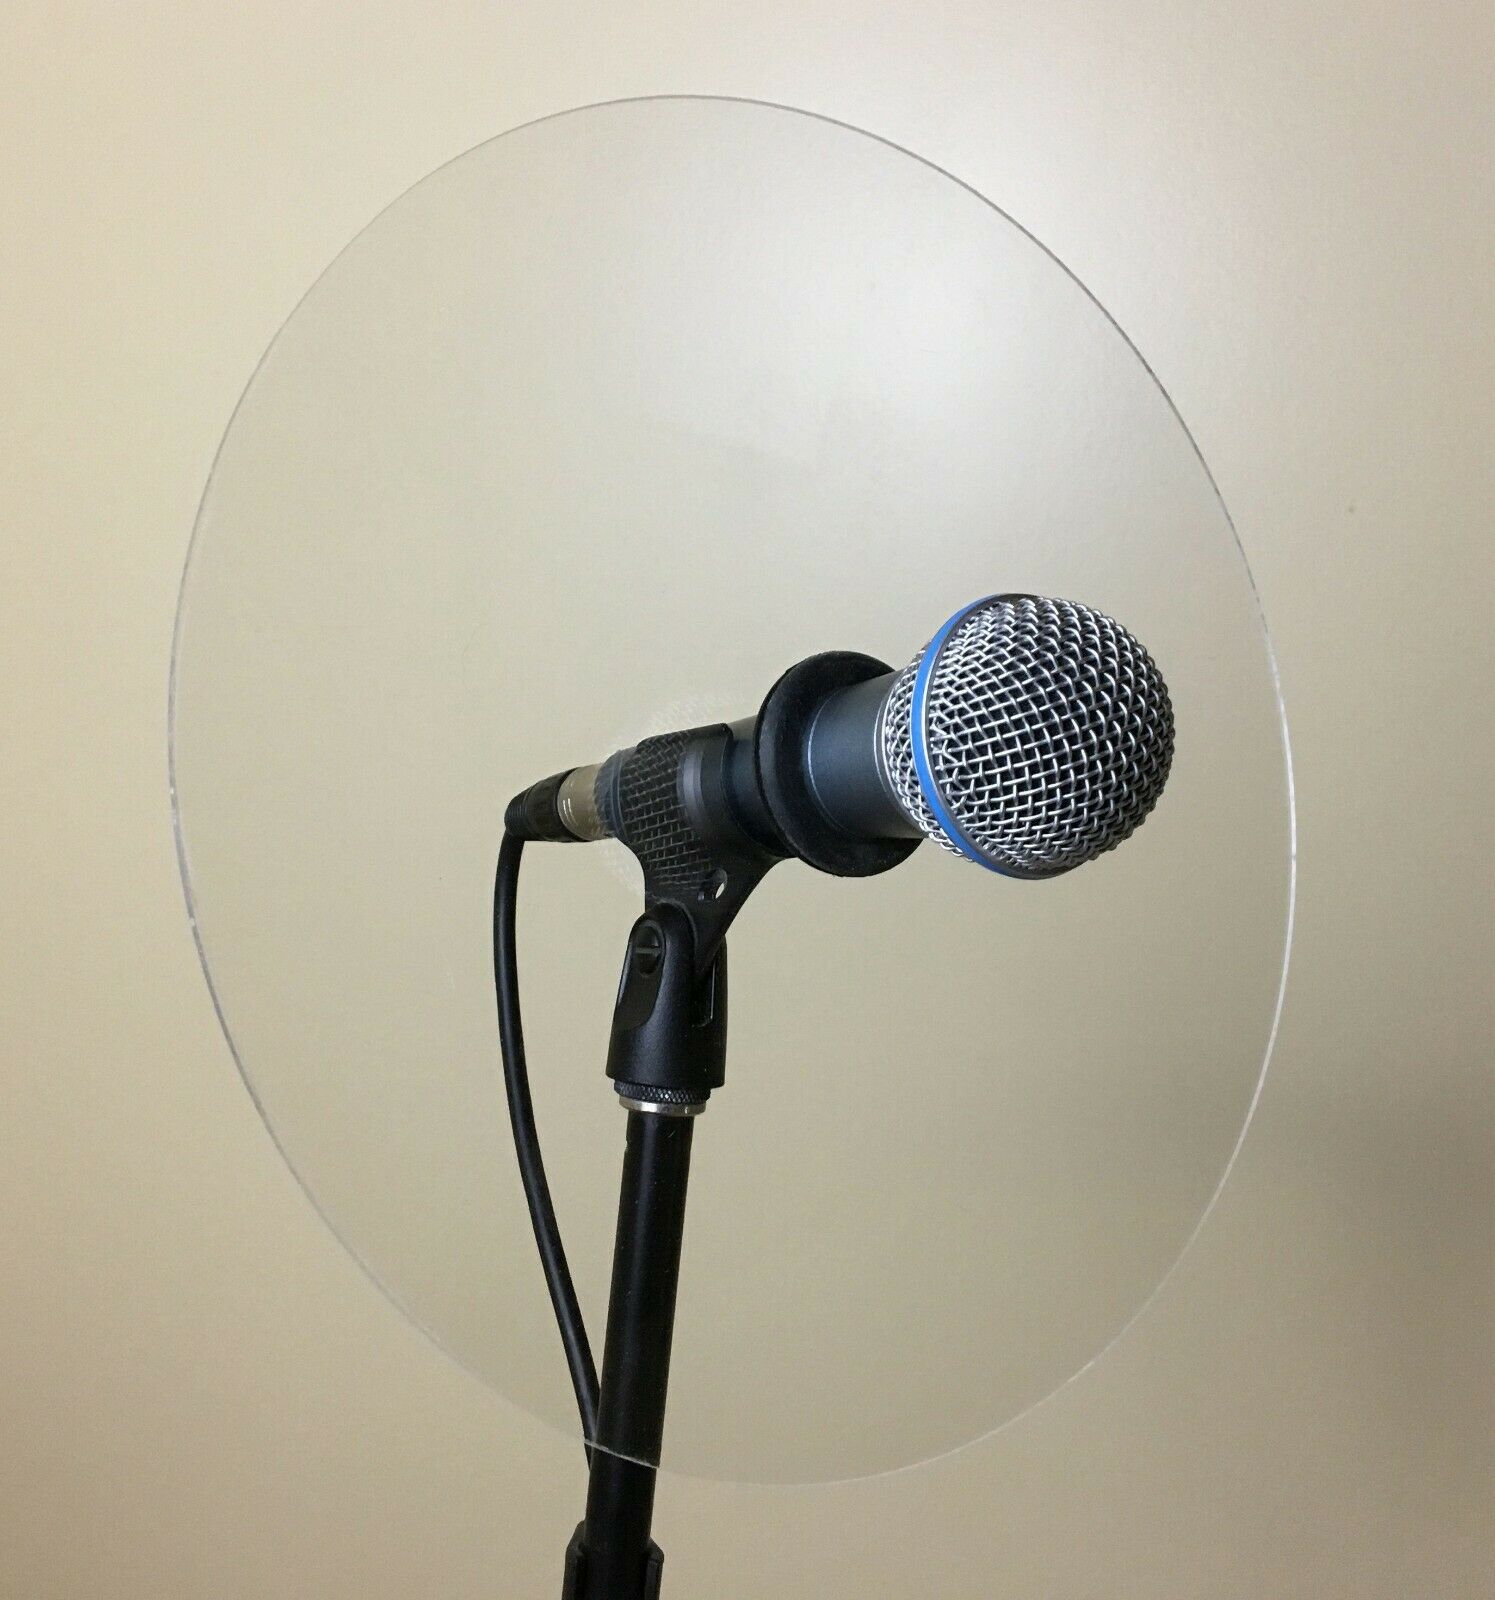 Trumpet Microphone Reflector Shield For Live Sound Monitoring, Fits Shure 57, 58